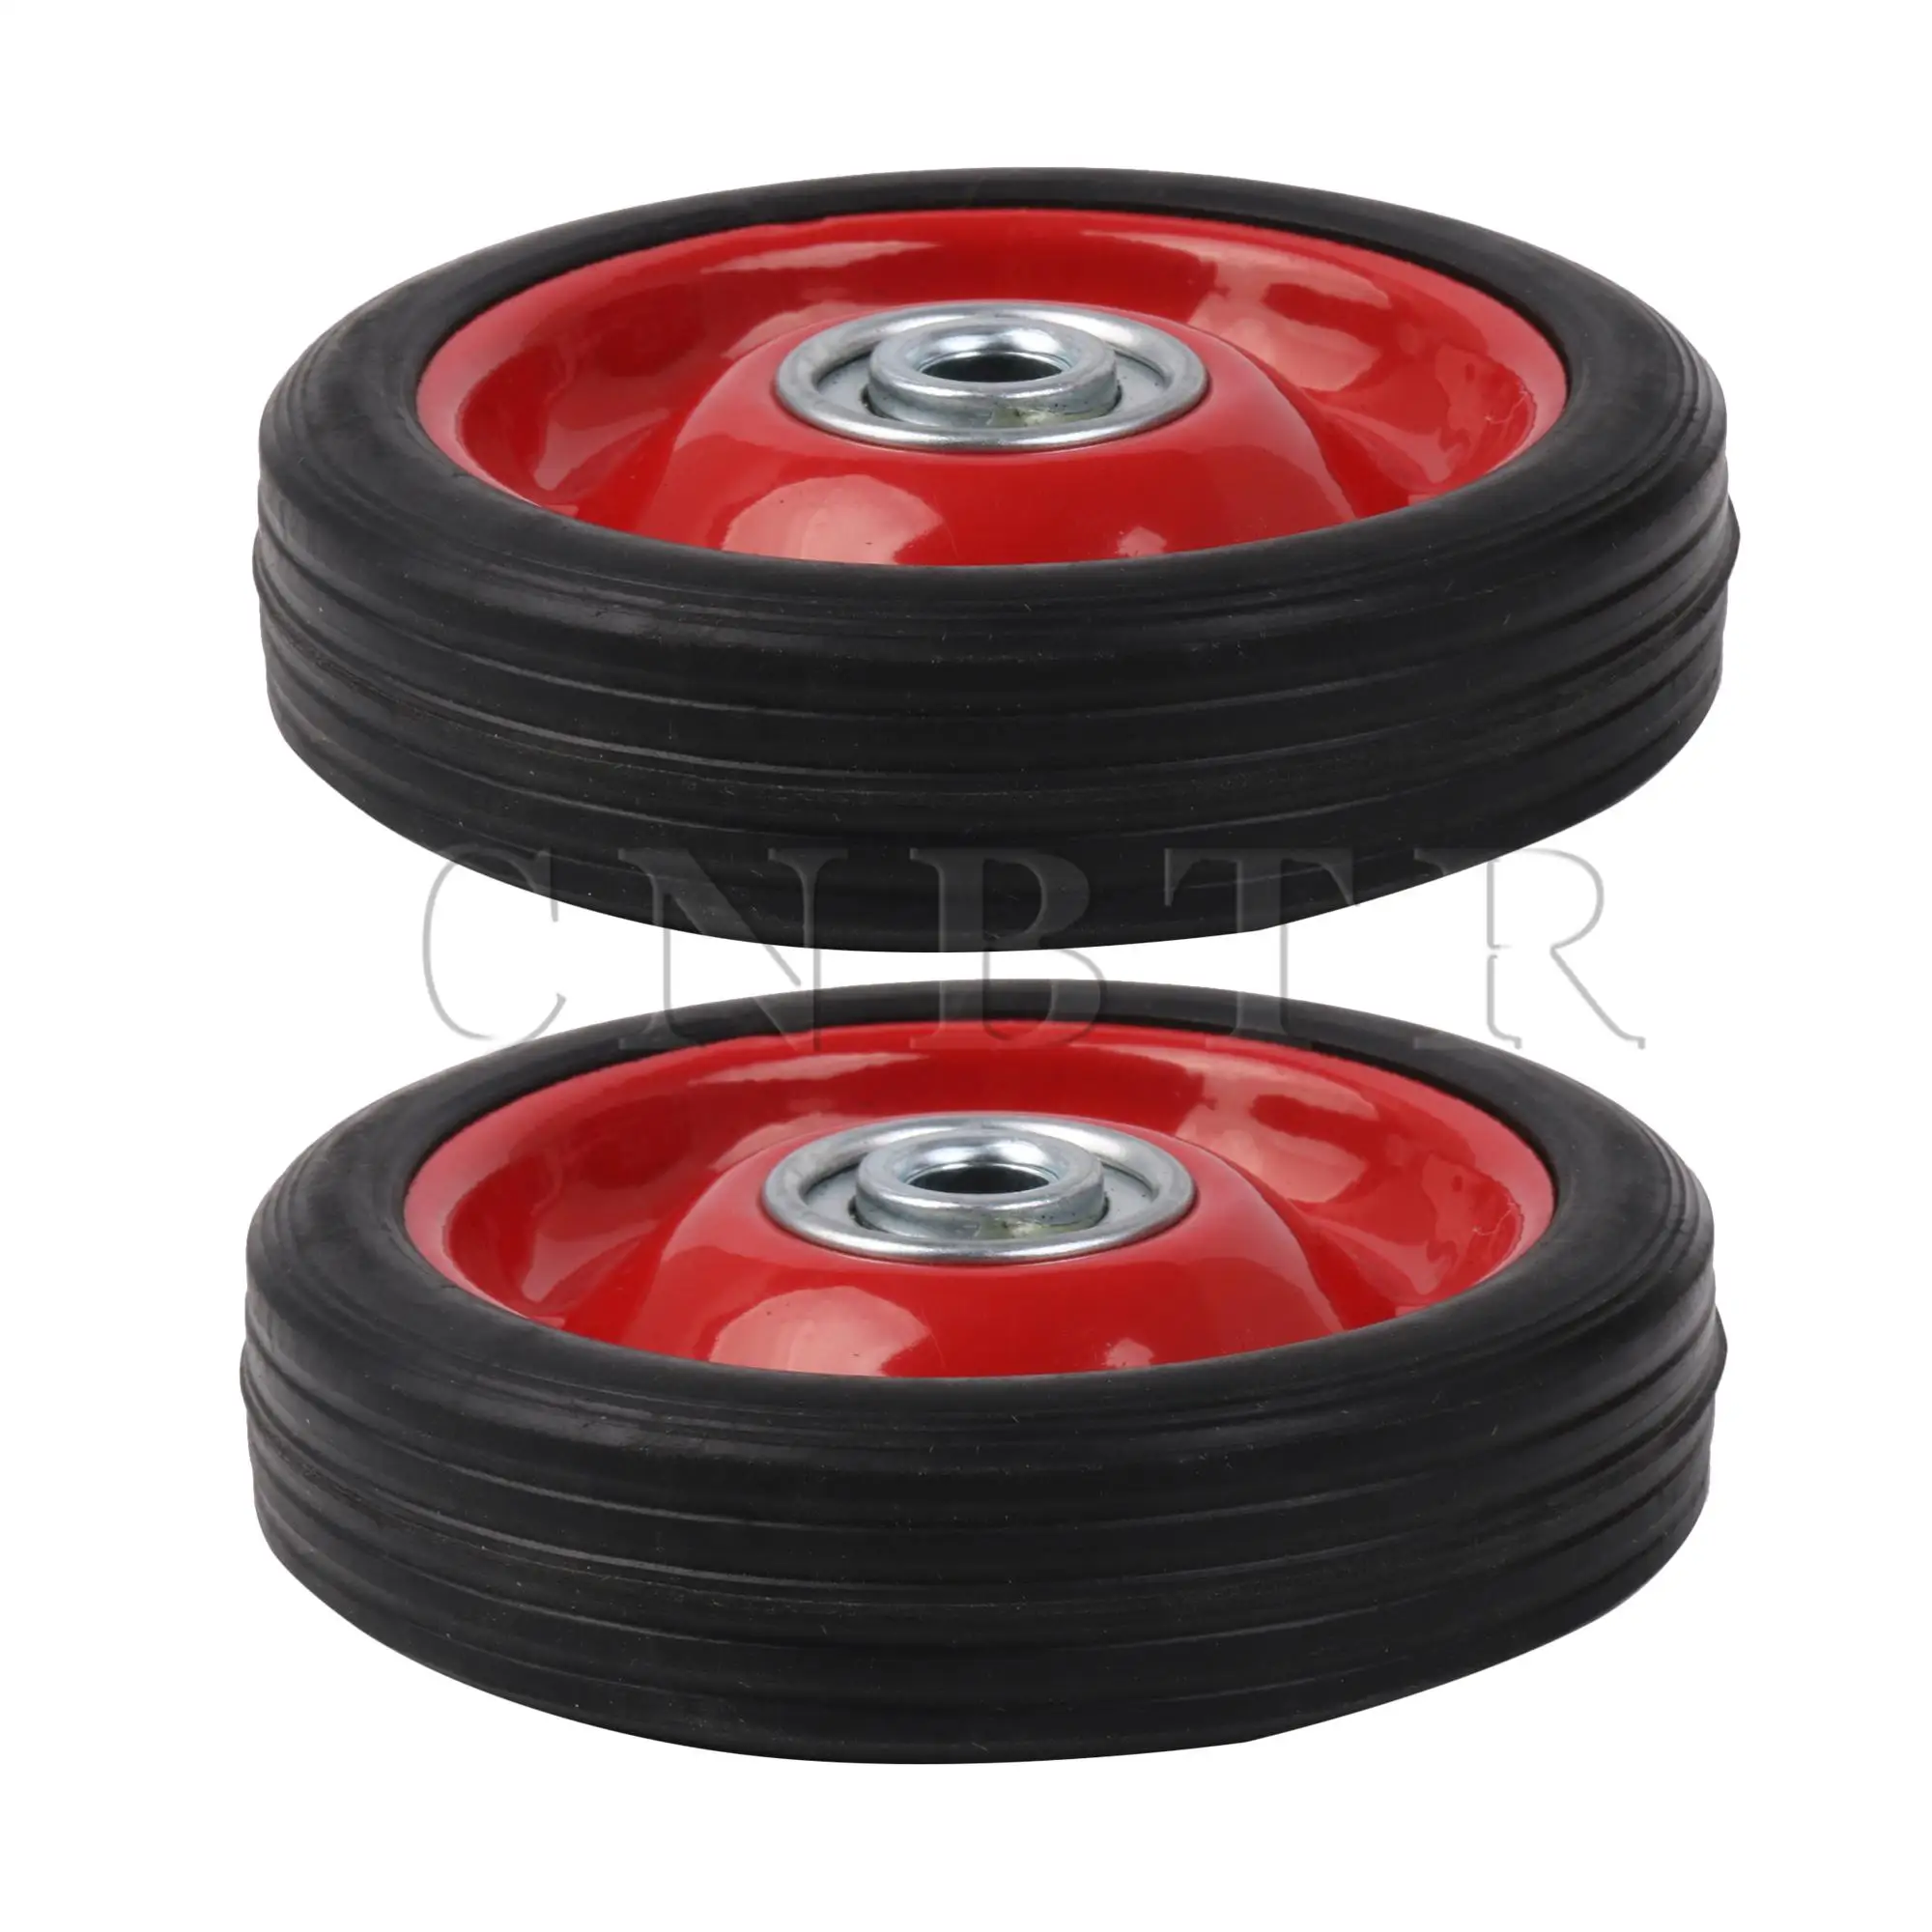 

CNBTR 2Pieces Lawn Mower Rubber Tire Wheel 5 Inches Outer Dia 132.27 LBS Load Red